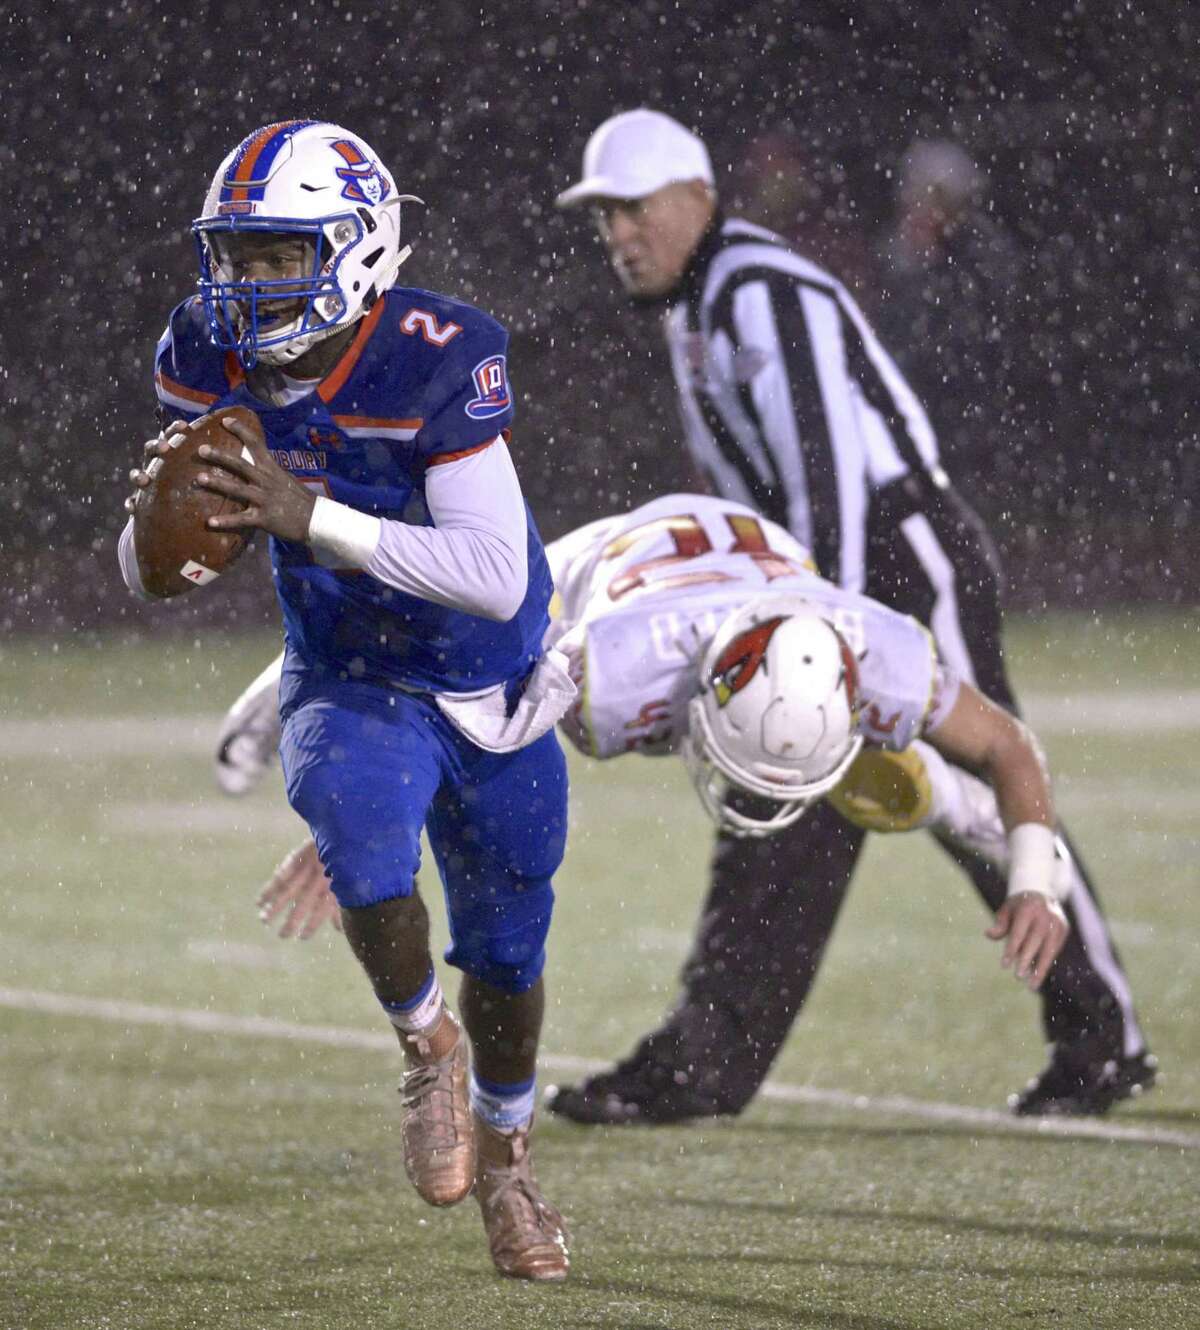 Danbury quarterback Malachi Hopkins (2) scrambles out of the backfield ad away from Greenwich's Gramoz Bici (42) in the football game between Greenwich and Danbury high schools, Friday night, November 9, 2018, at Danbury High School, Danbury, Conn.